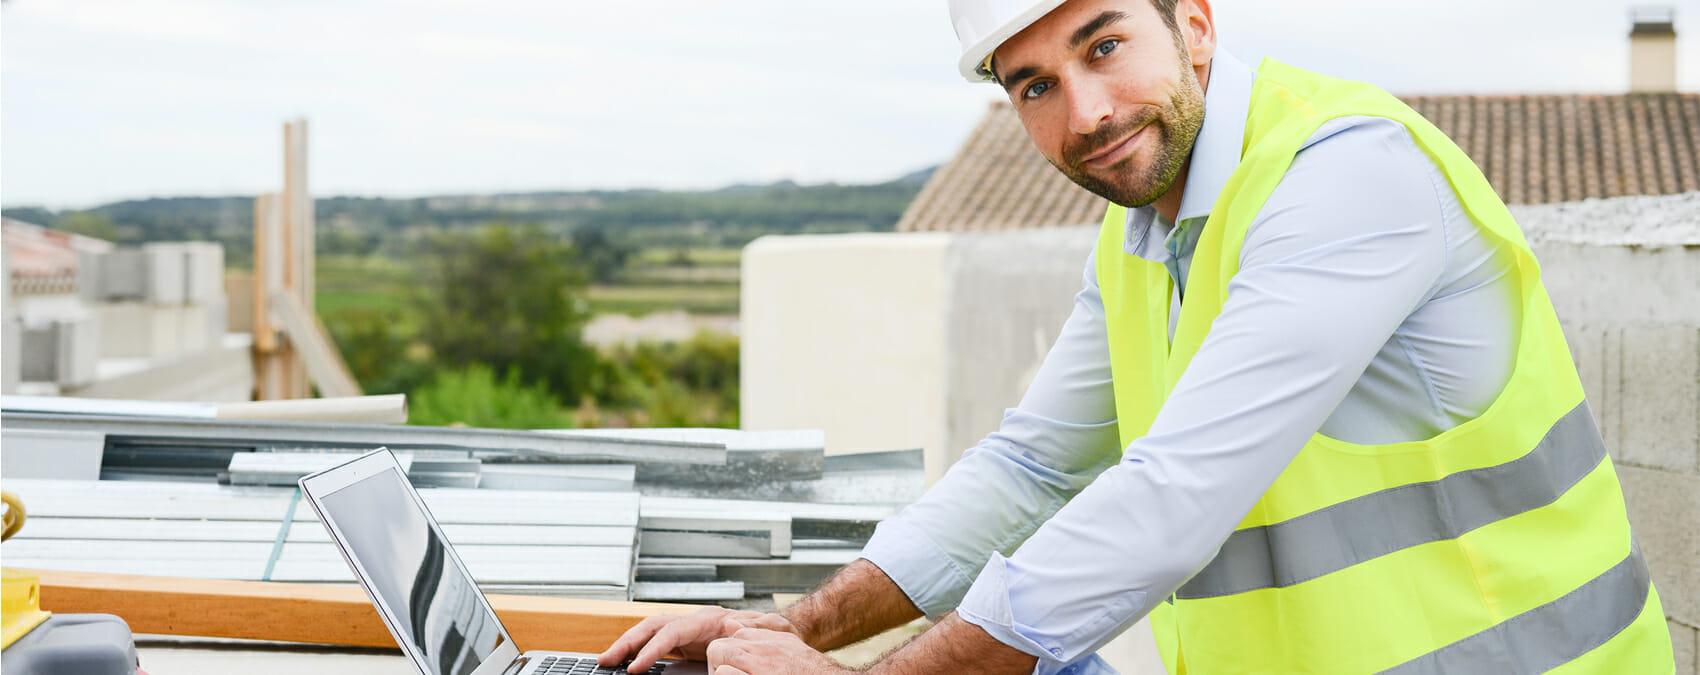 How to Get Roofing Leads